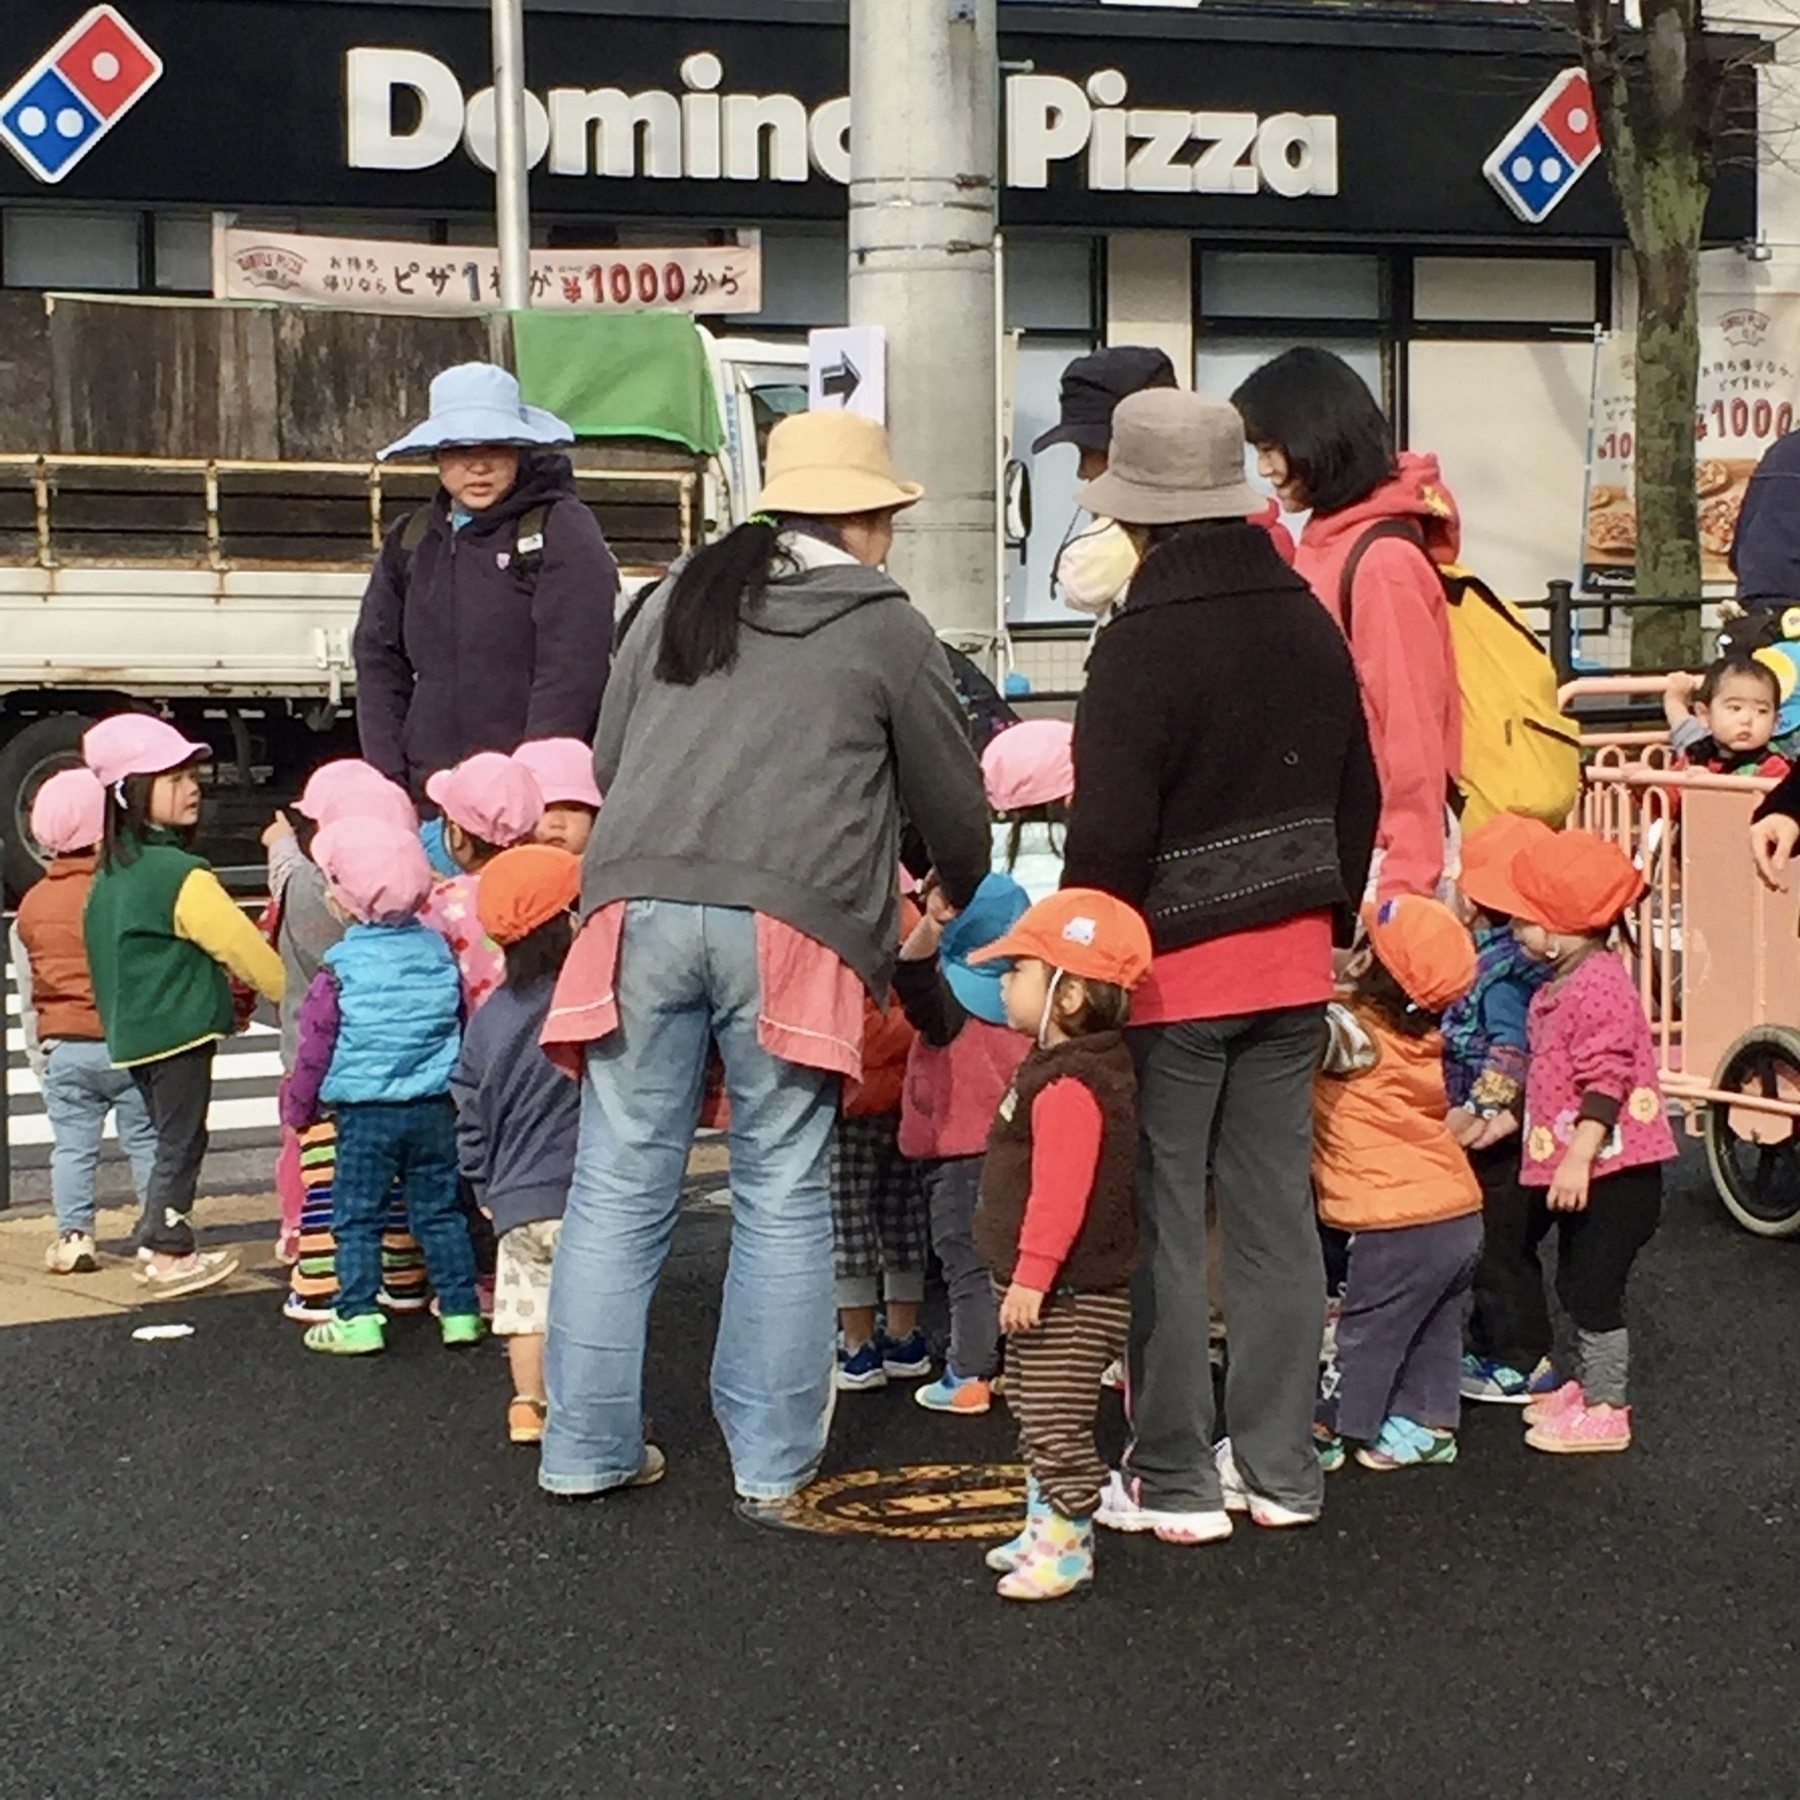 Kindergarten teachers surrounding their students at a traffic stop light in Yokohama Japan. The children are wearing various colored hats indicating their class. 